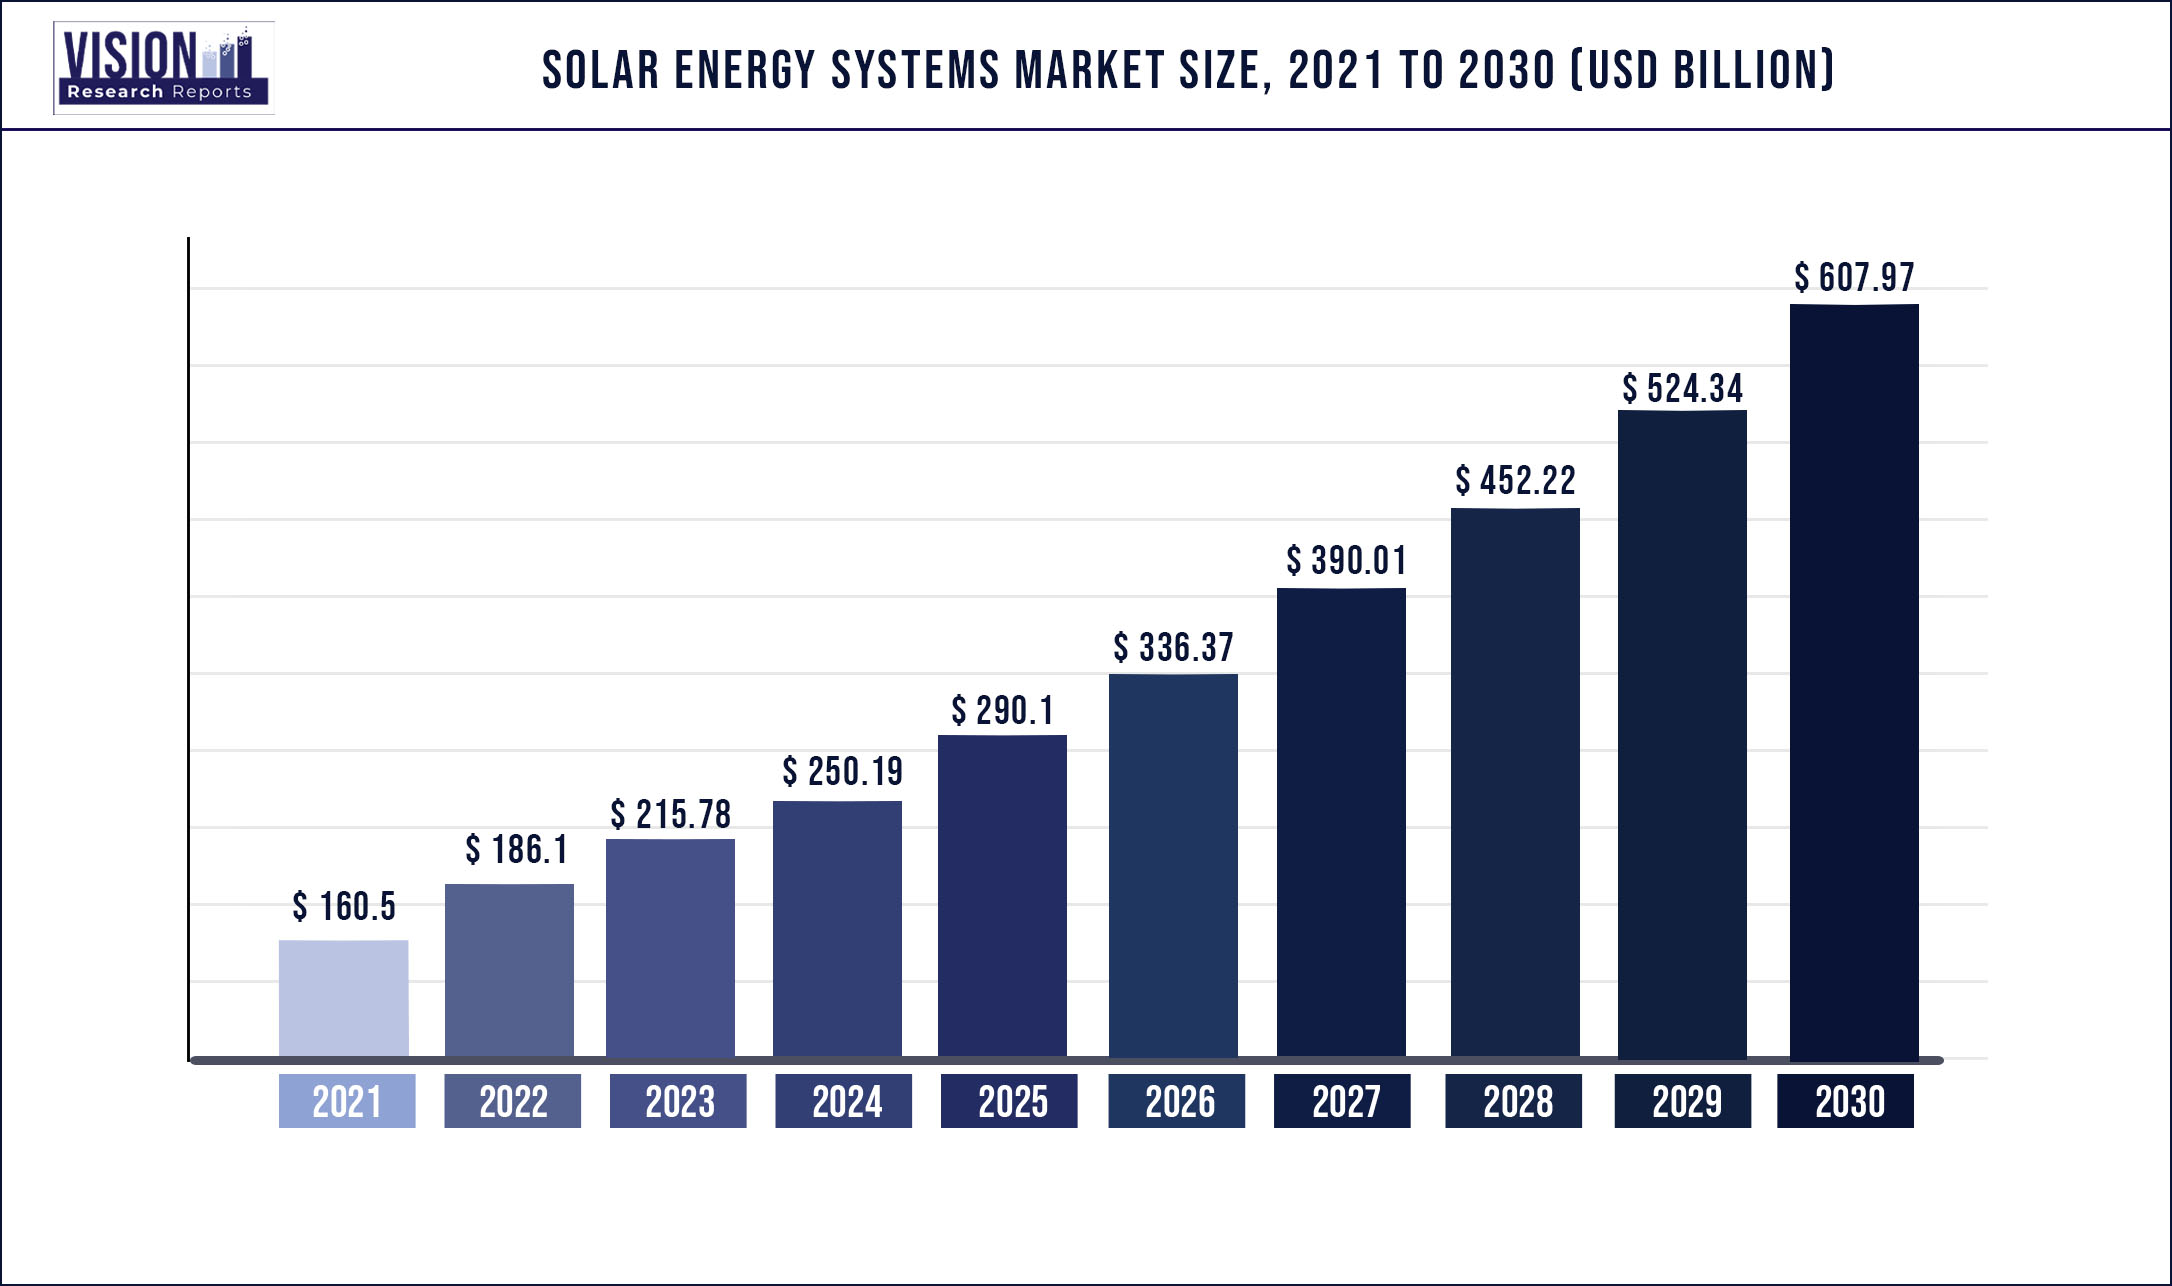 Solar Energy Systems Market Size 2021 to 2030